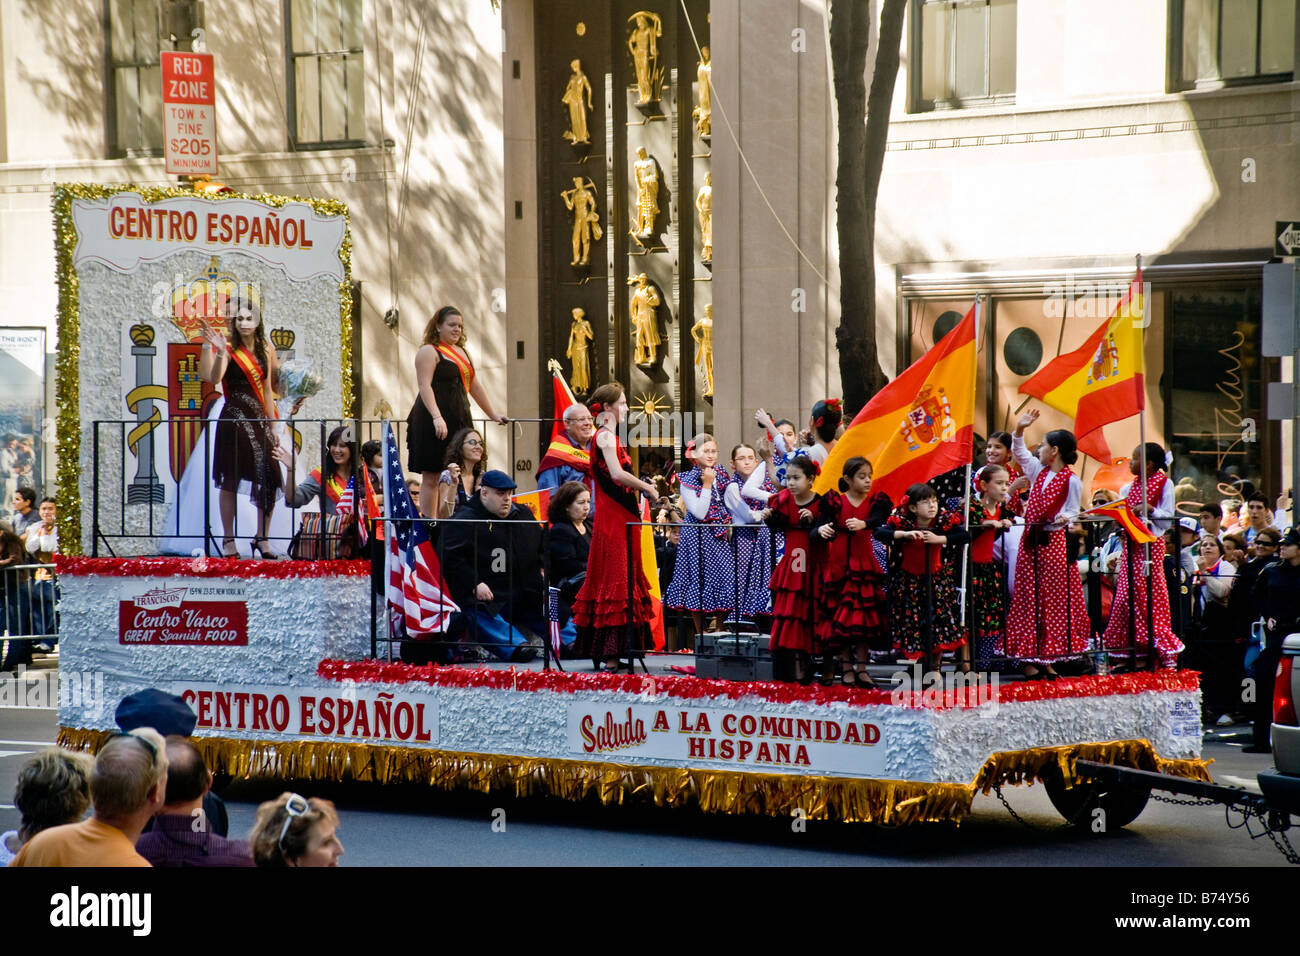 Group of people in a Columbus day parade representing a local hispanic social center Stock Photo